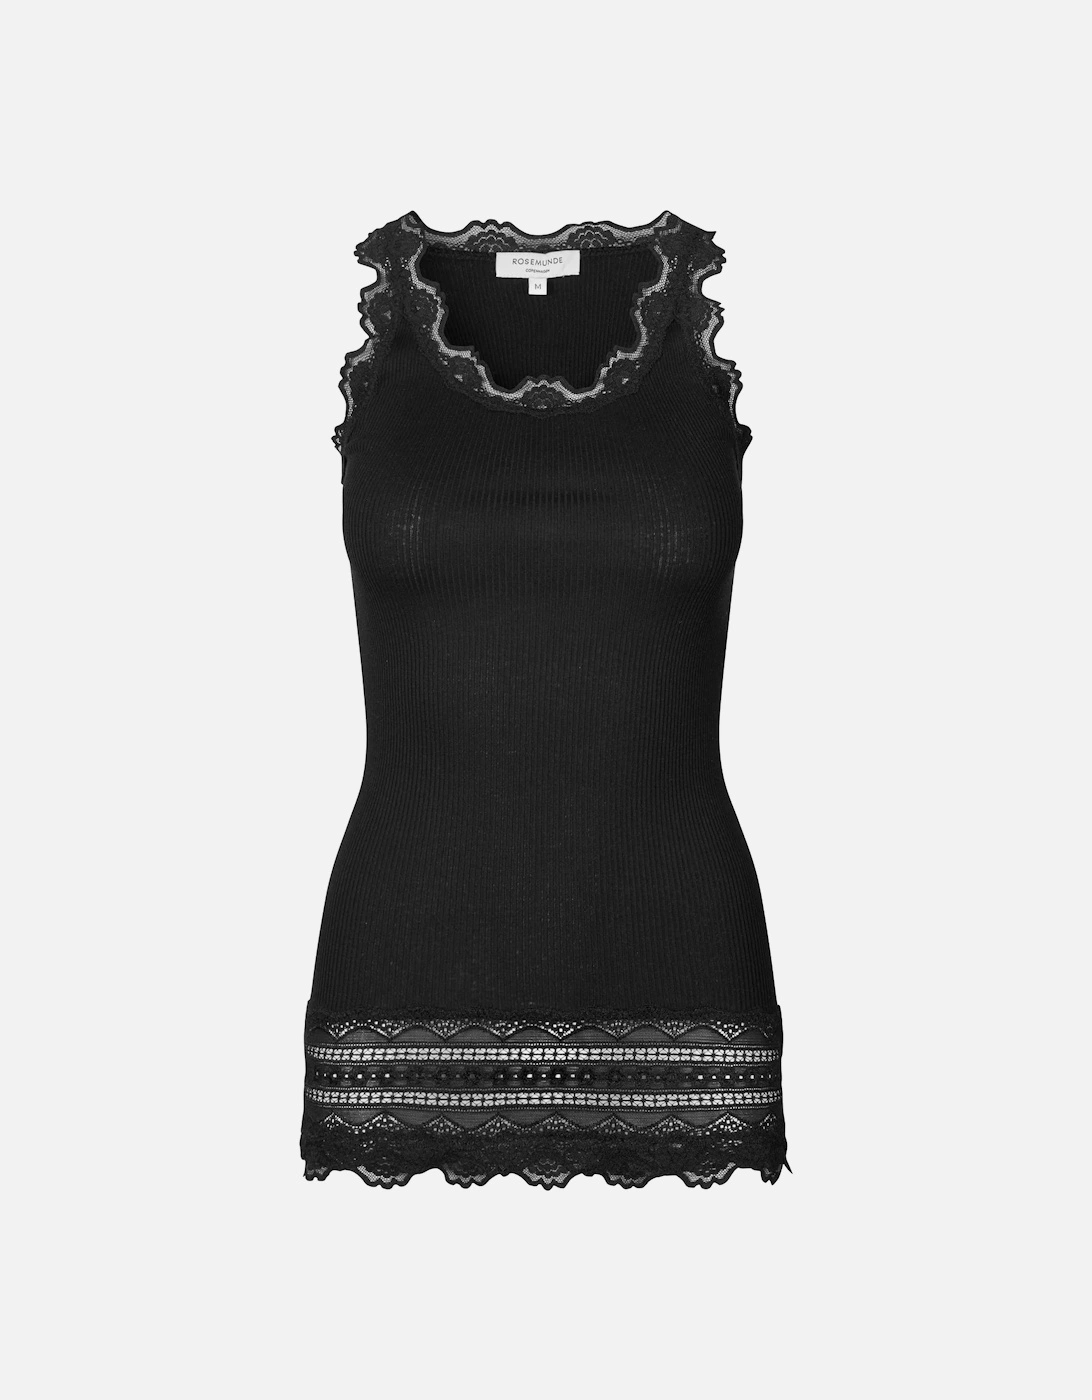 silk and lace vest in black, 2 of 1